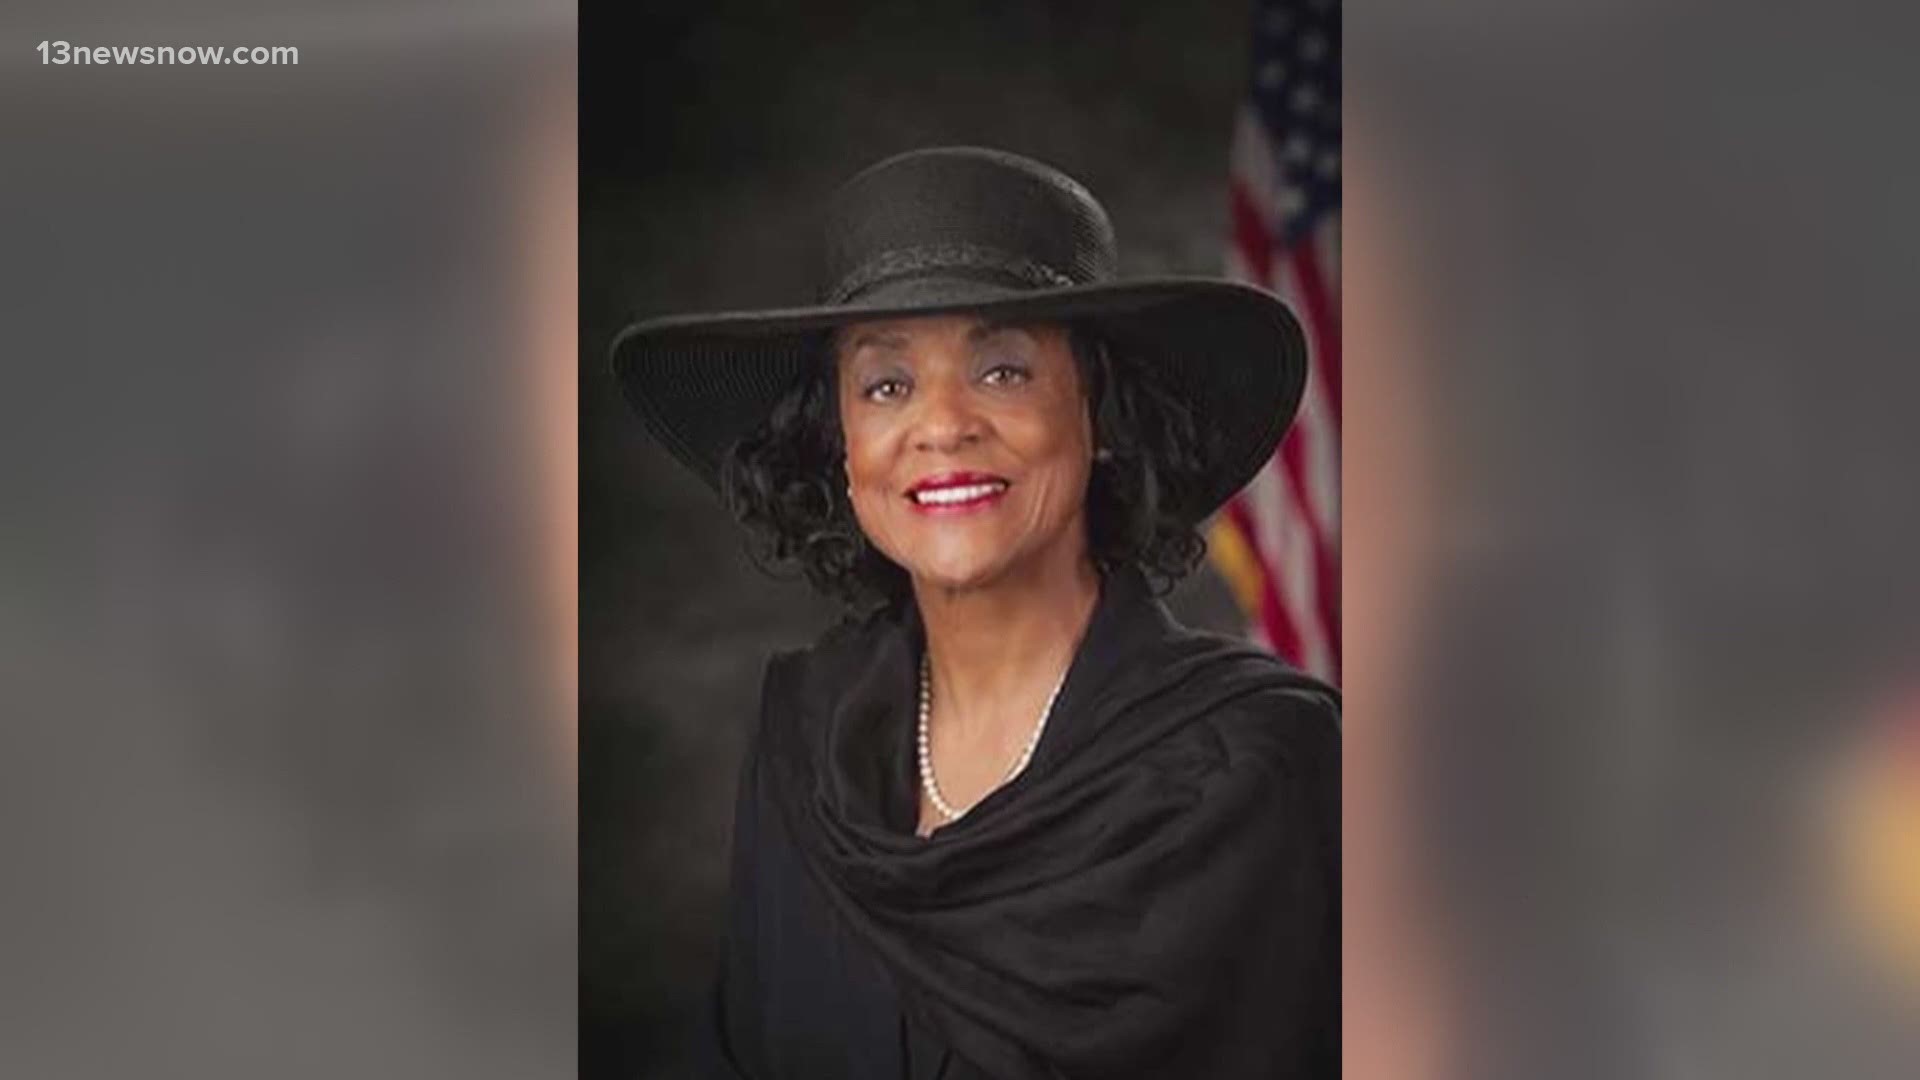 Portsmouth City Manager Dr. Lydia Pettis Patton is stepping down from her position. She was appointed in 2015 and was the city's first female city manager.